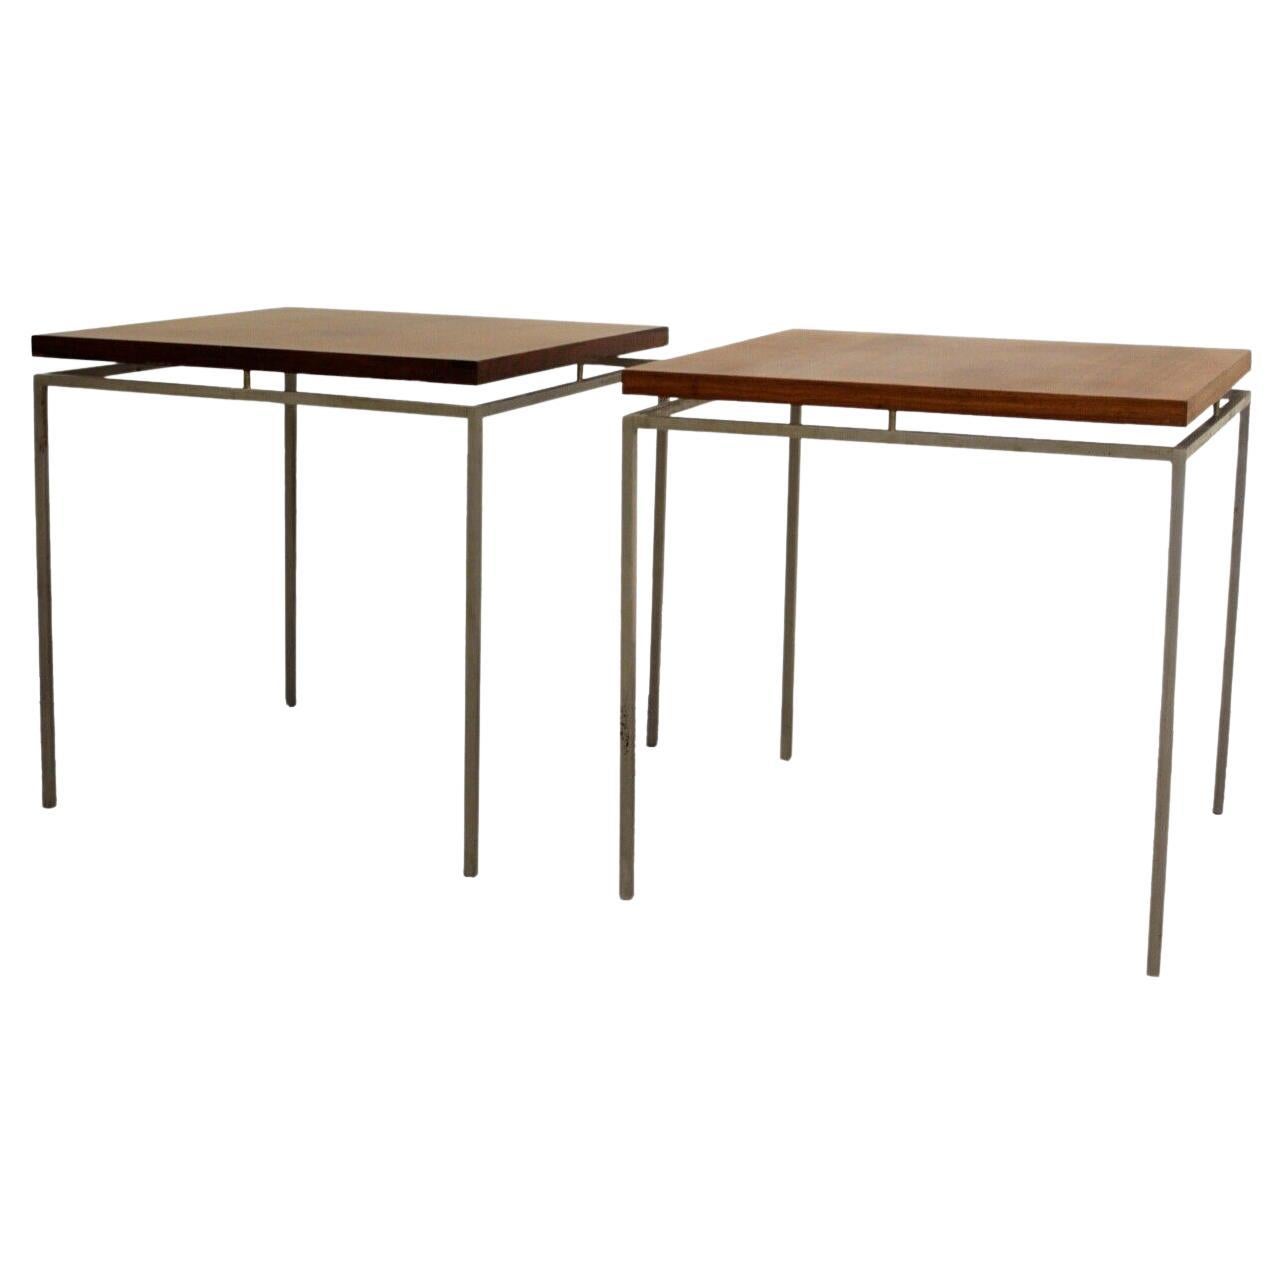 Pair of Mid-Century Modern Danish Rosewood Side Tables by Knud Joos for Mobler